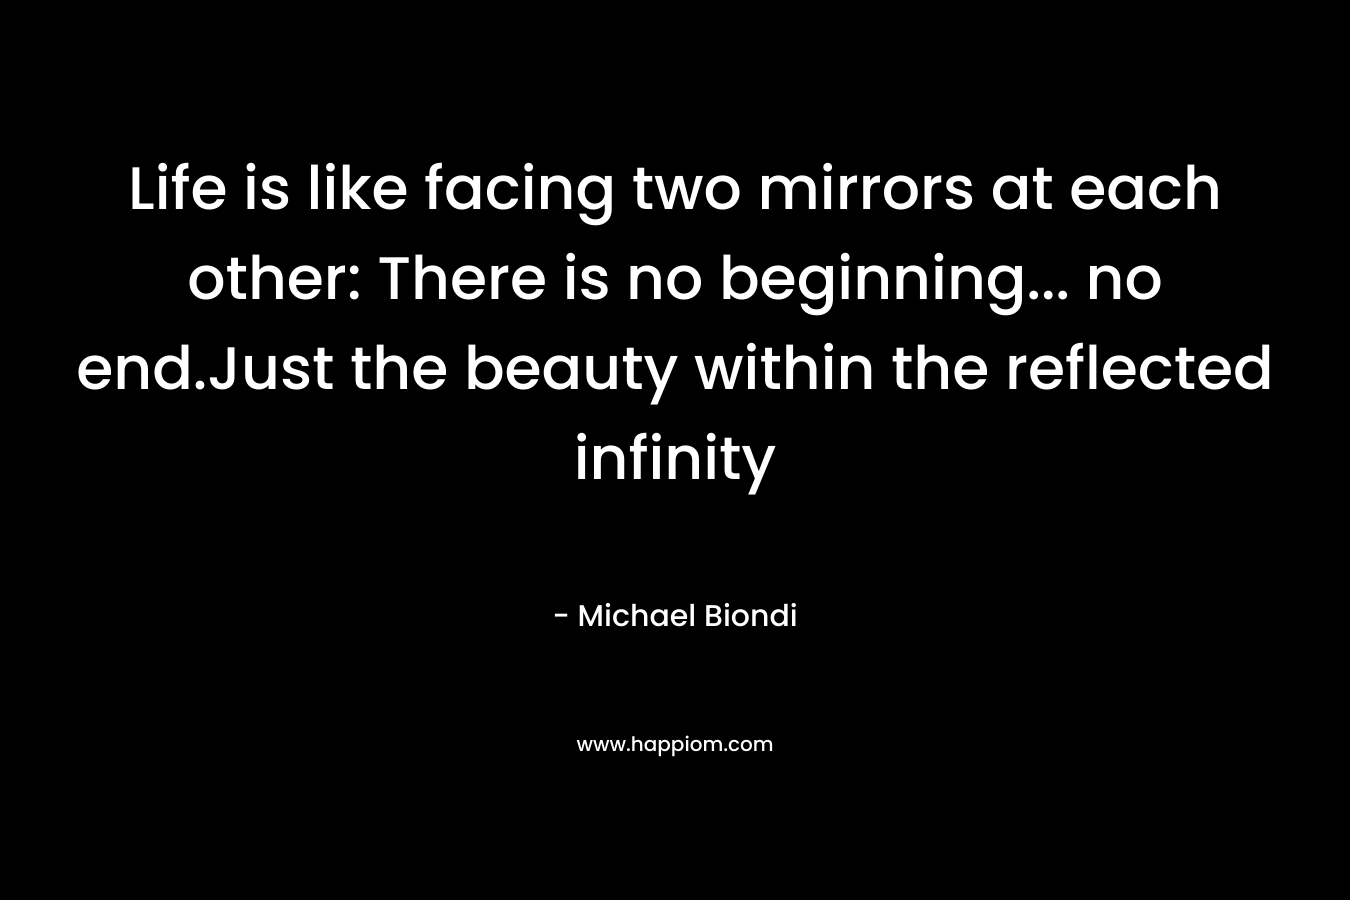 Life is like facing two mirrors at each other: There is no beginning... no end.Just the beauty within the reflected infinity